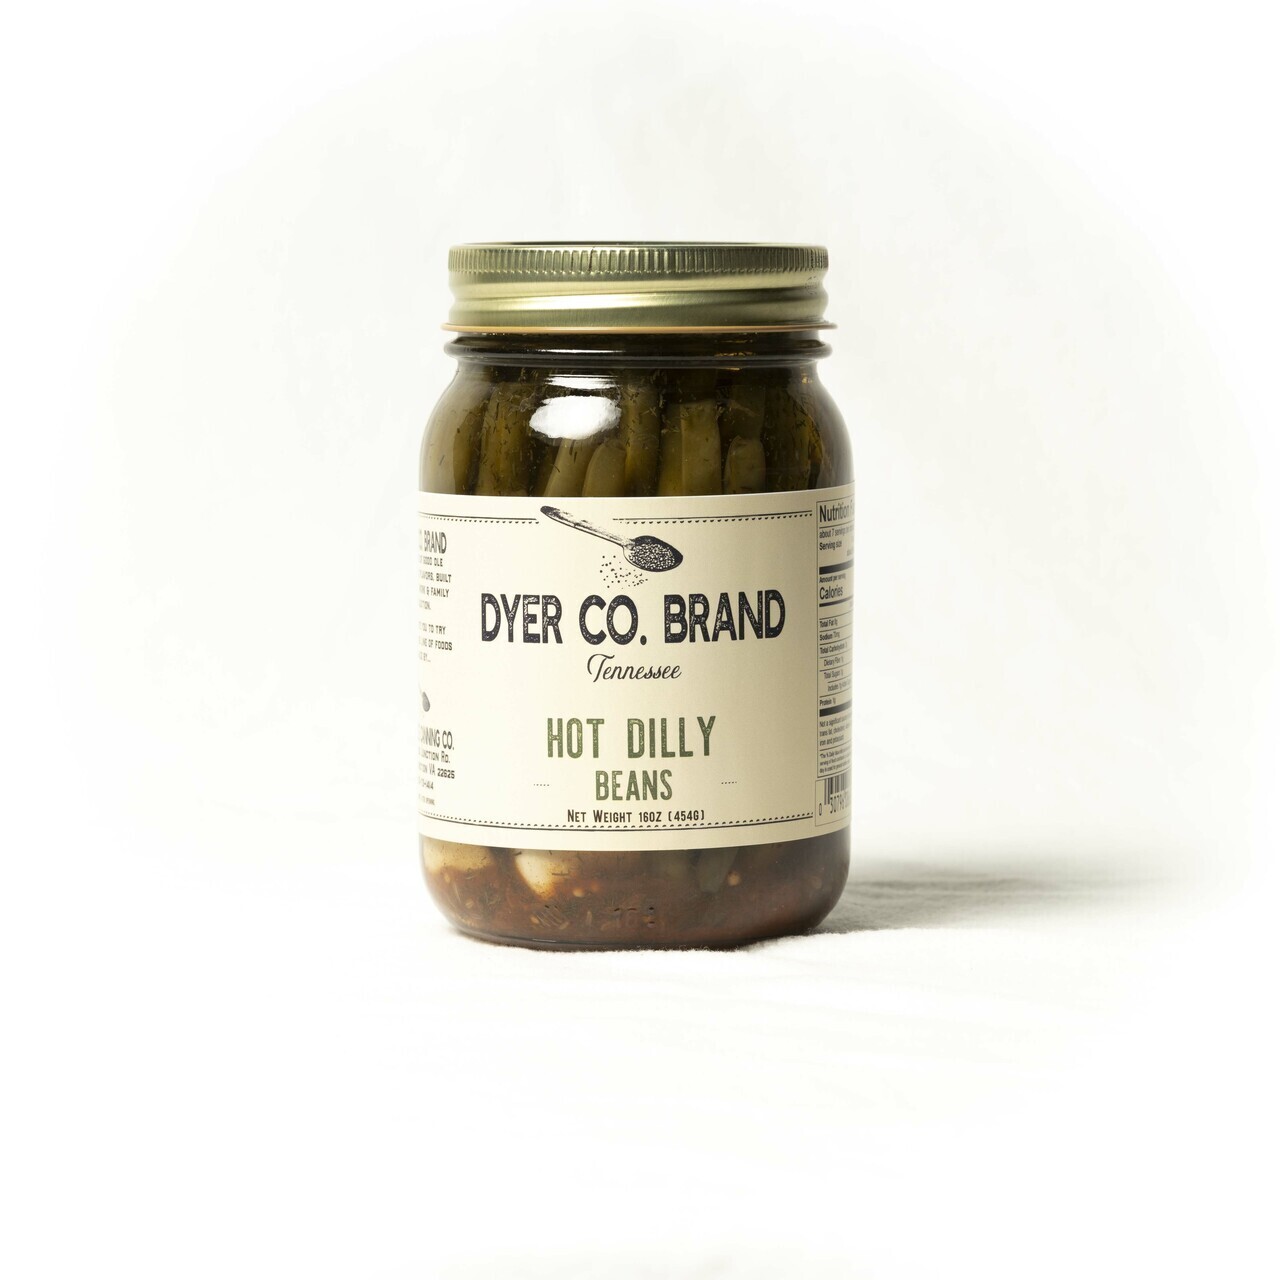 Dyer Co Brand Hot Dilly Beans